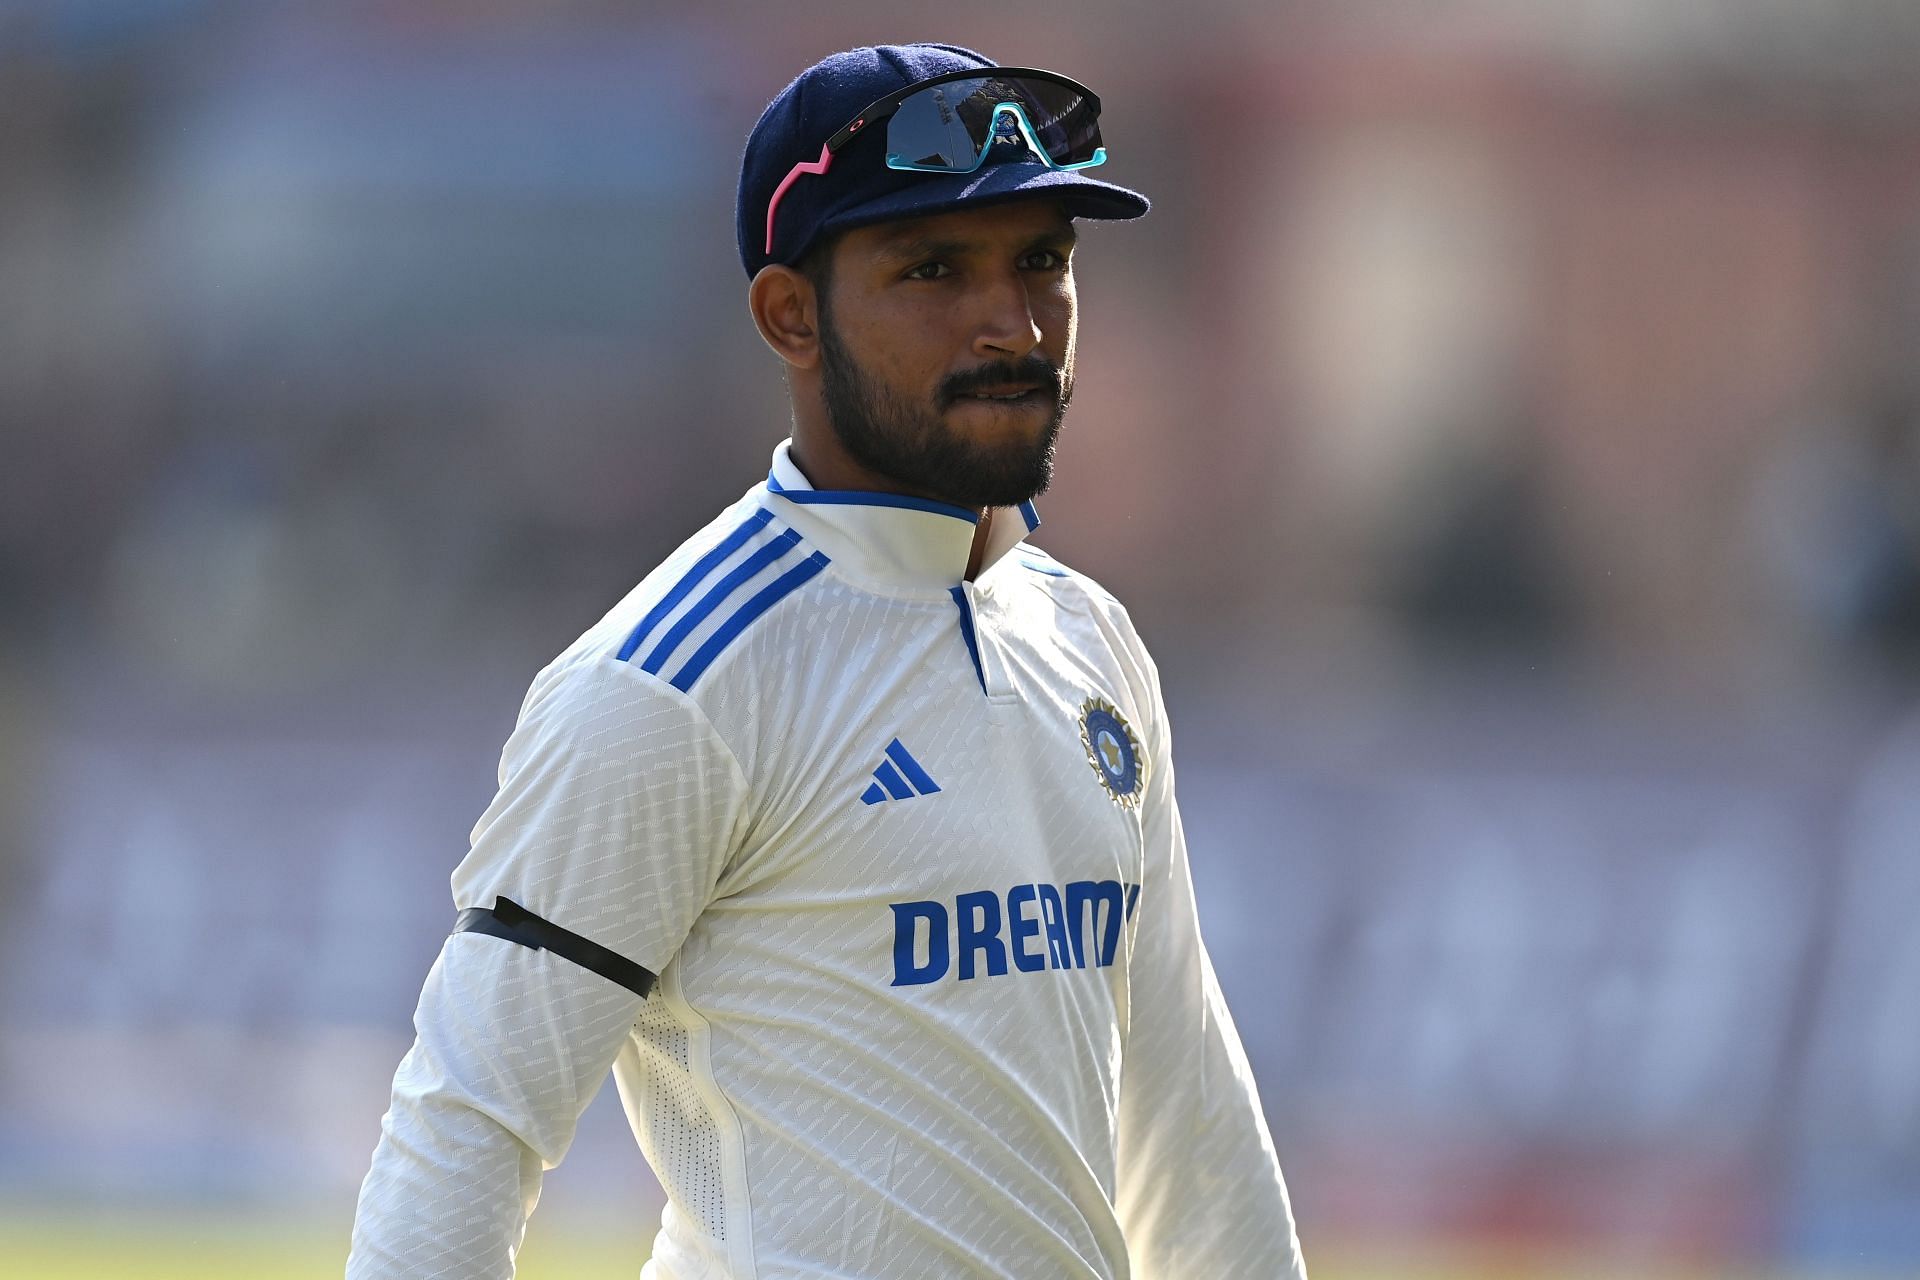 Dhruv Jurel effected a stumping and took a catch in his debut Test. [P/C: Getty]